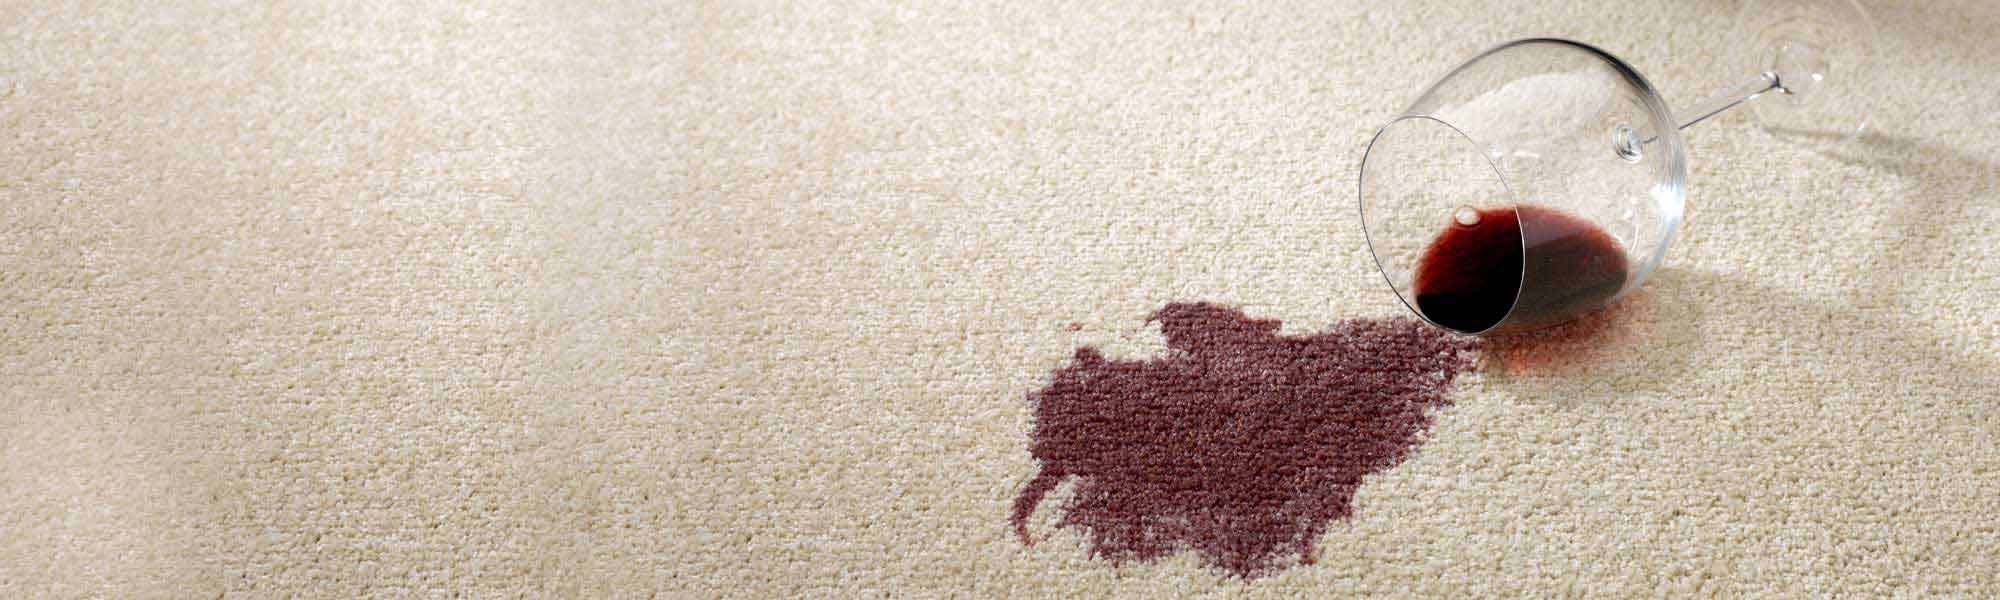 Professional Stain Removal Service in Tucson by Aztec Chem-Dry